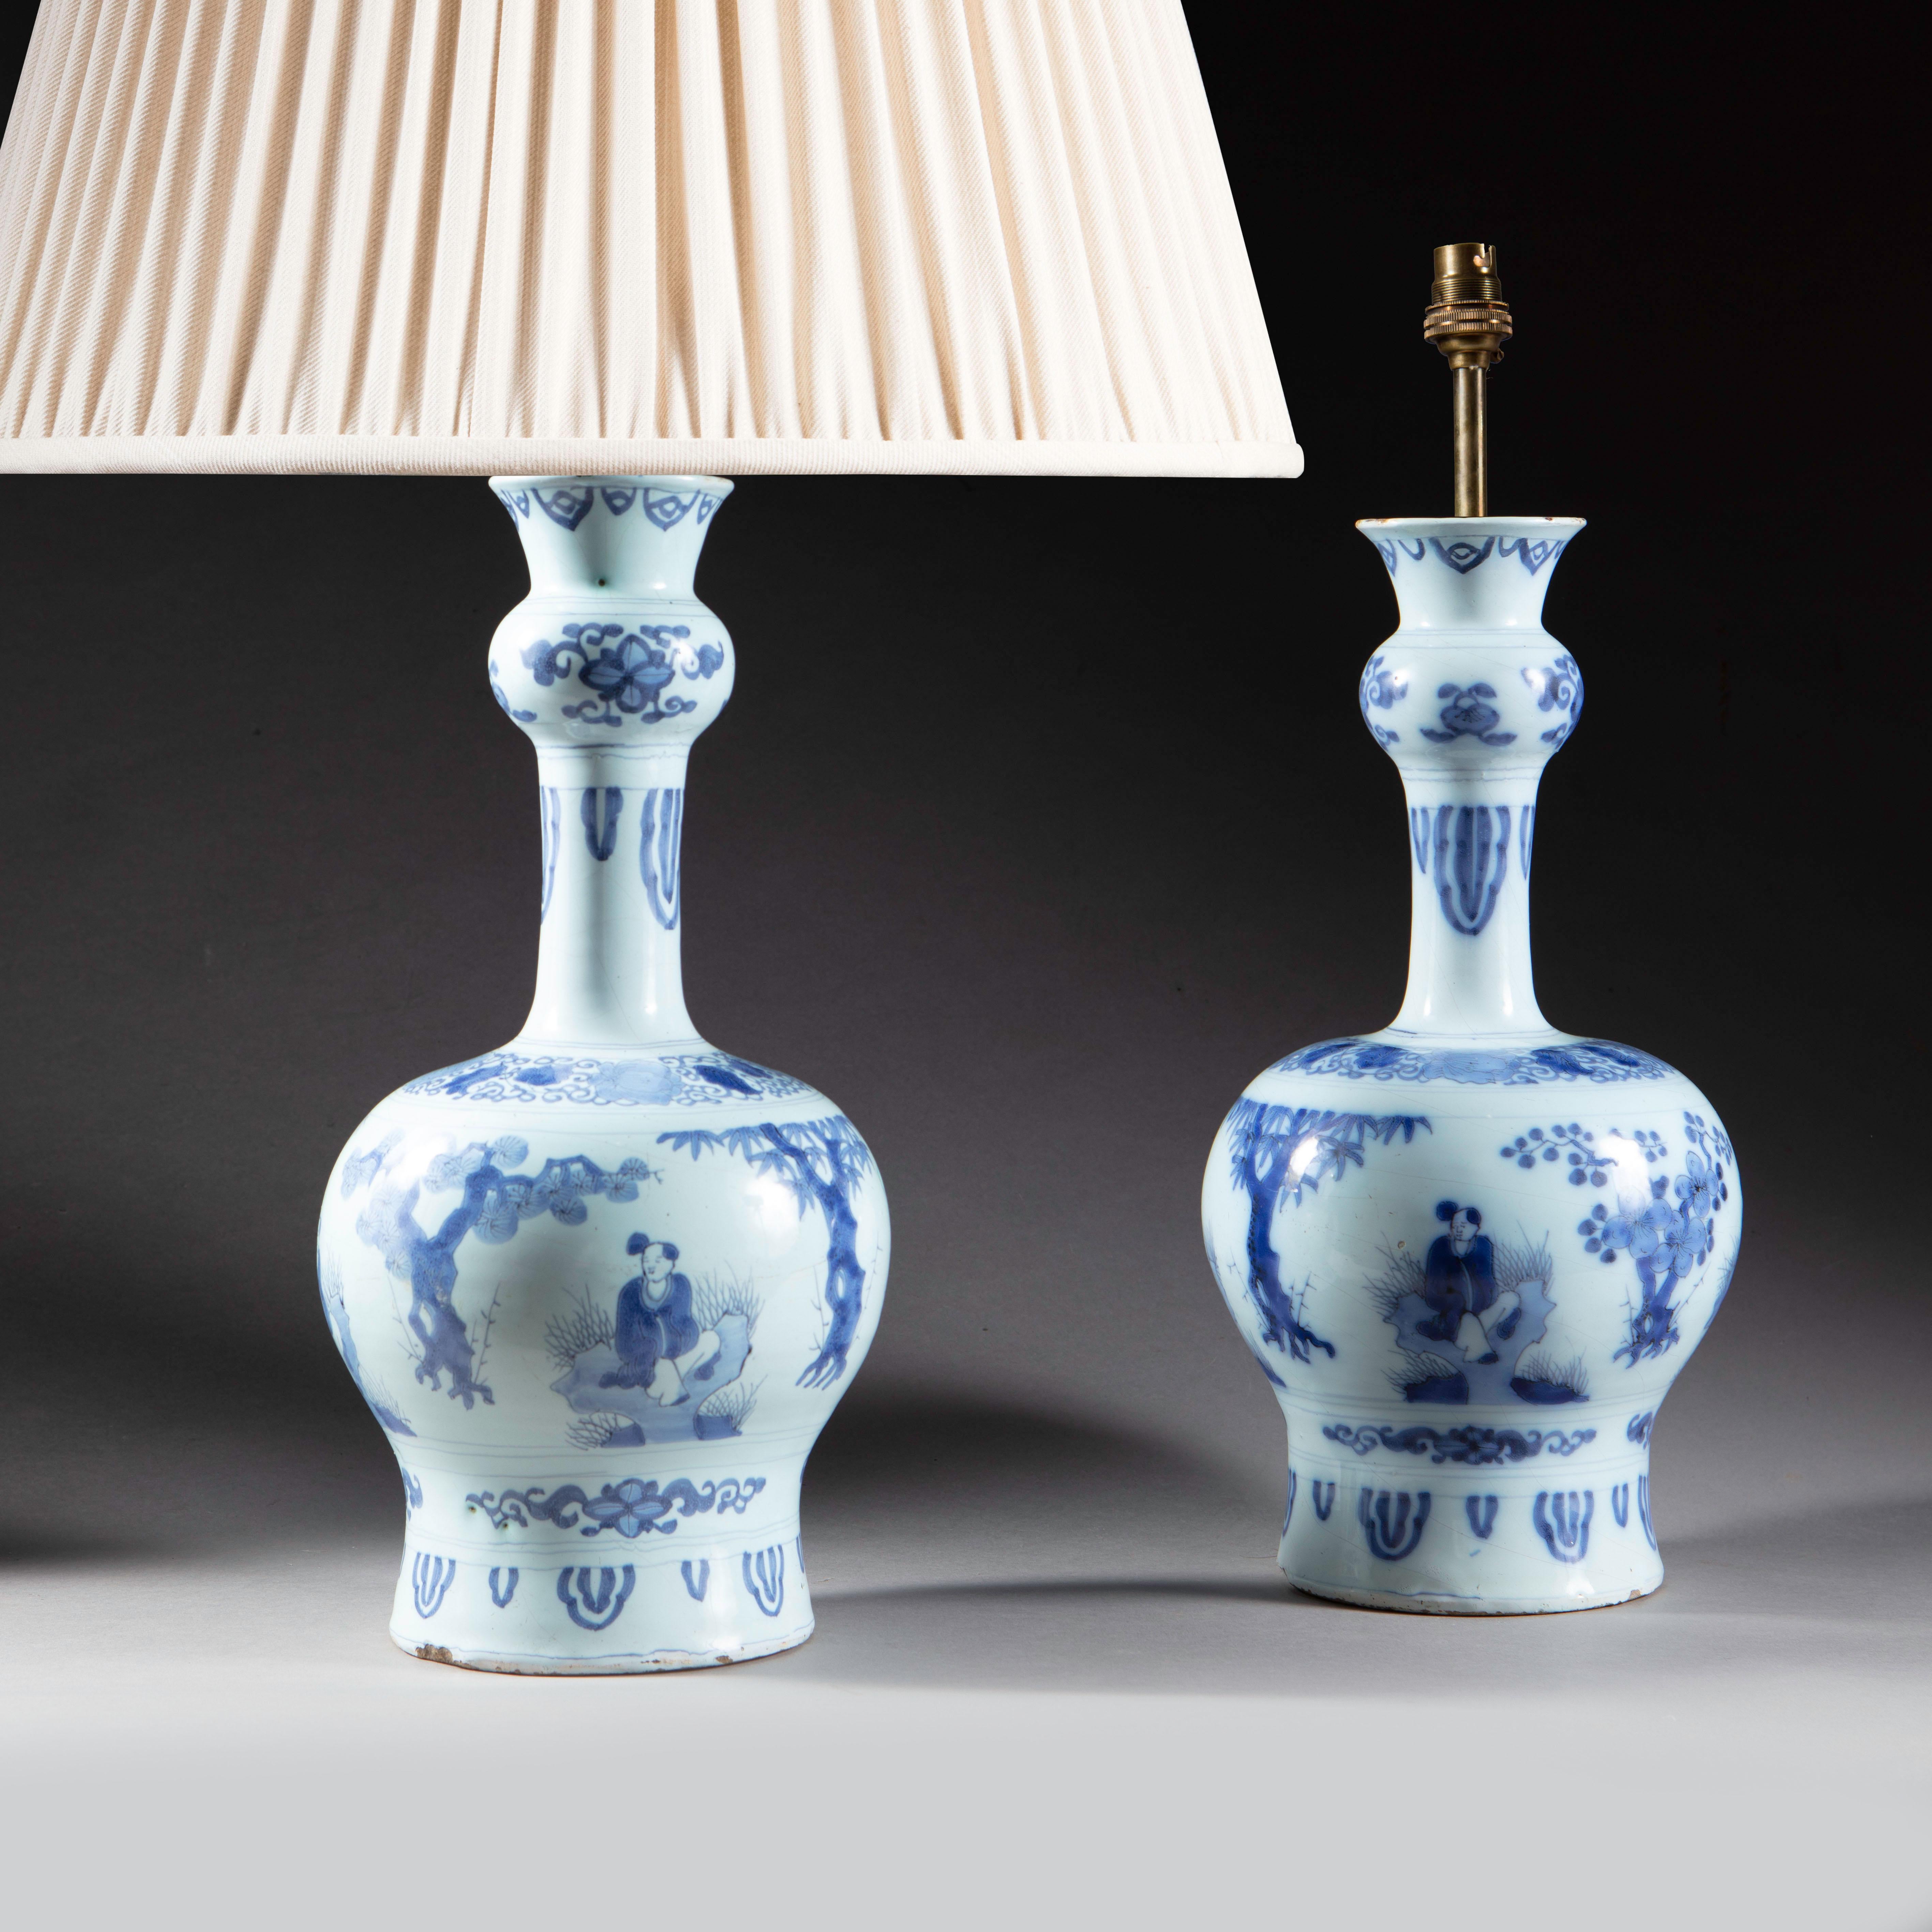 A charming pair of early 18th century Dutch Delft blue and white knobble vases decorated with repeating seated Chinese figures interspersed with trees possibly representing the Four Seasons Willow, Peach, and two ornamental Prunice trees. 
The